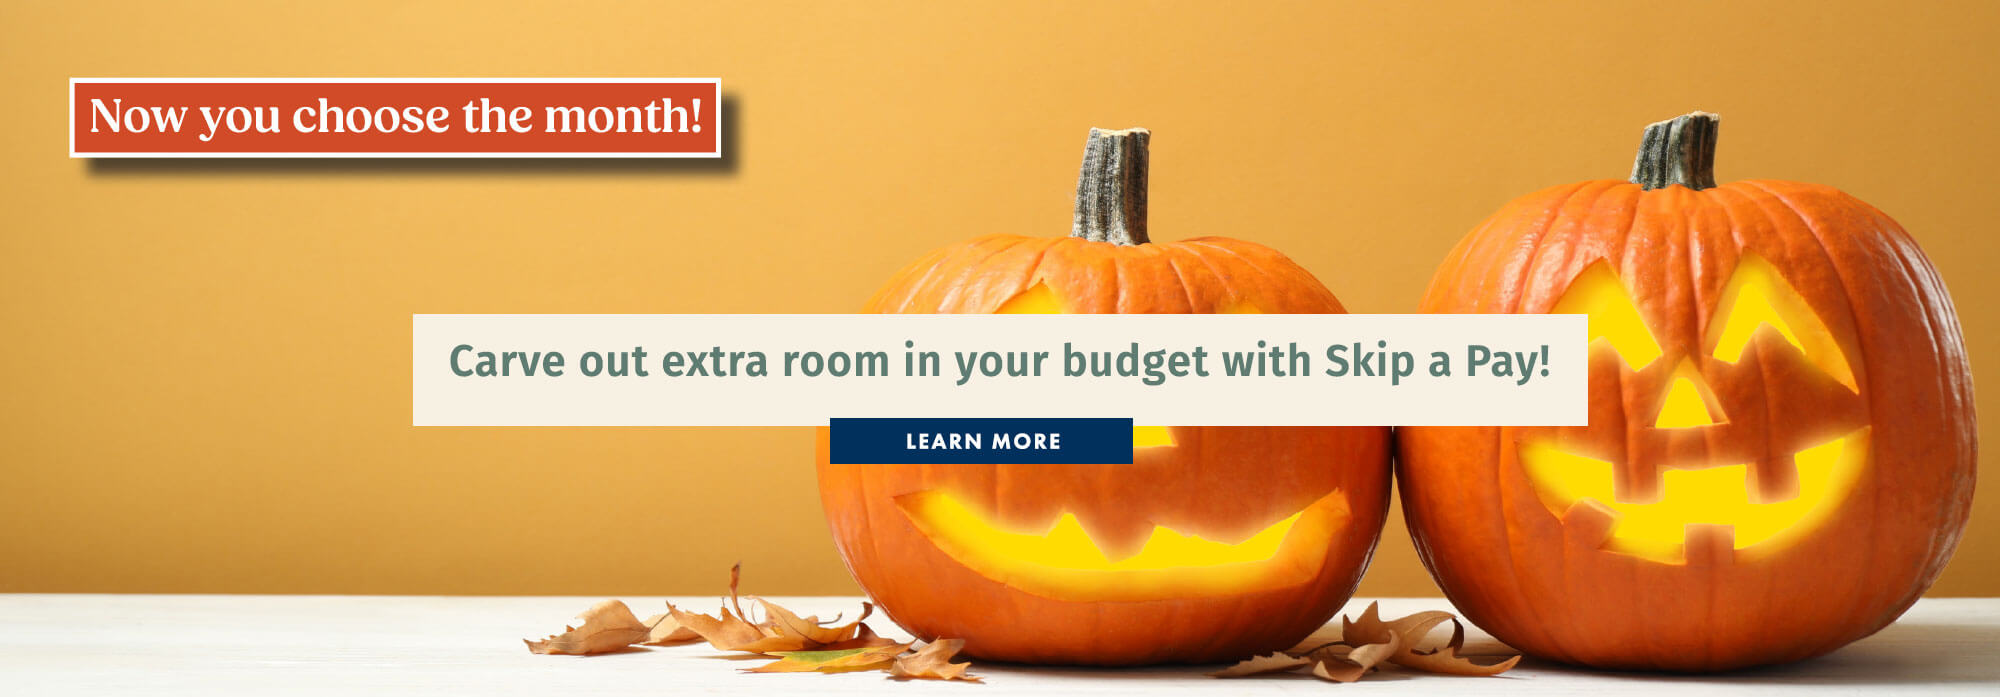 Carve out extra room in your budget with Skip A Pay!